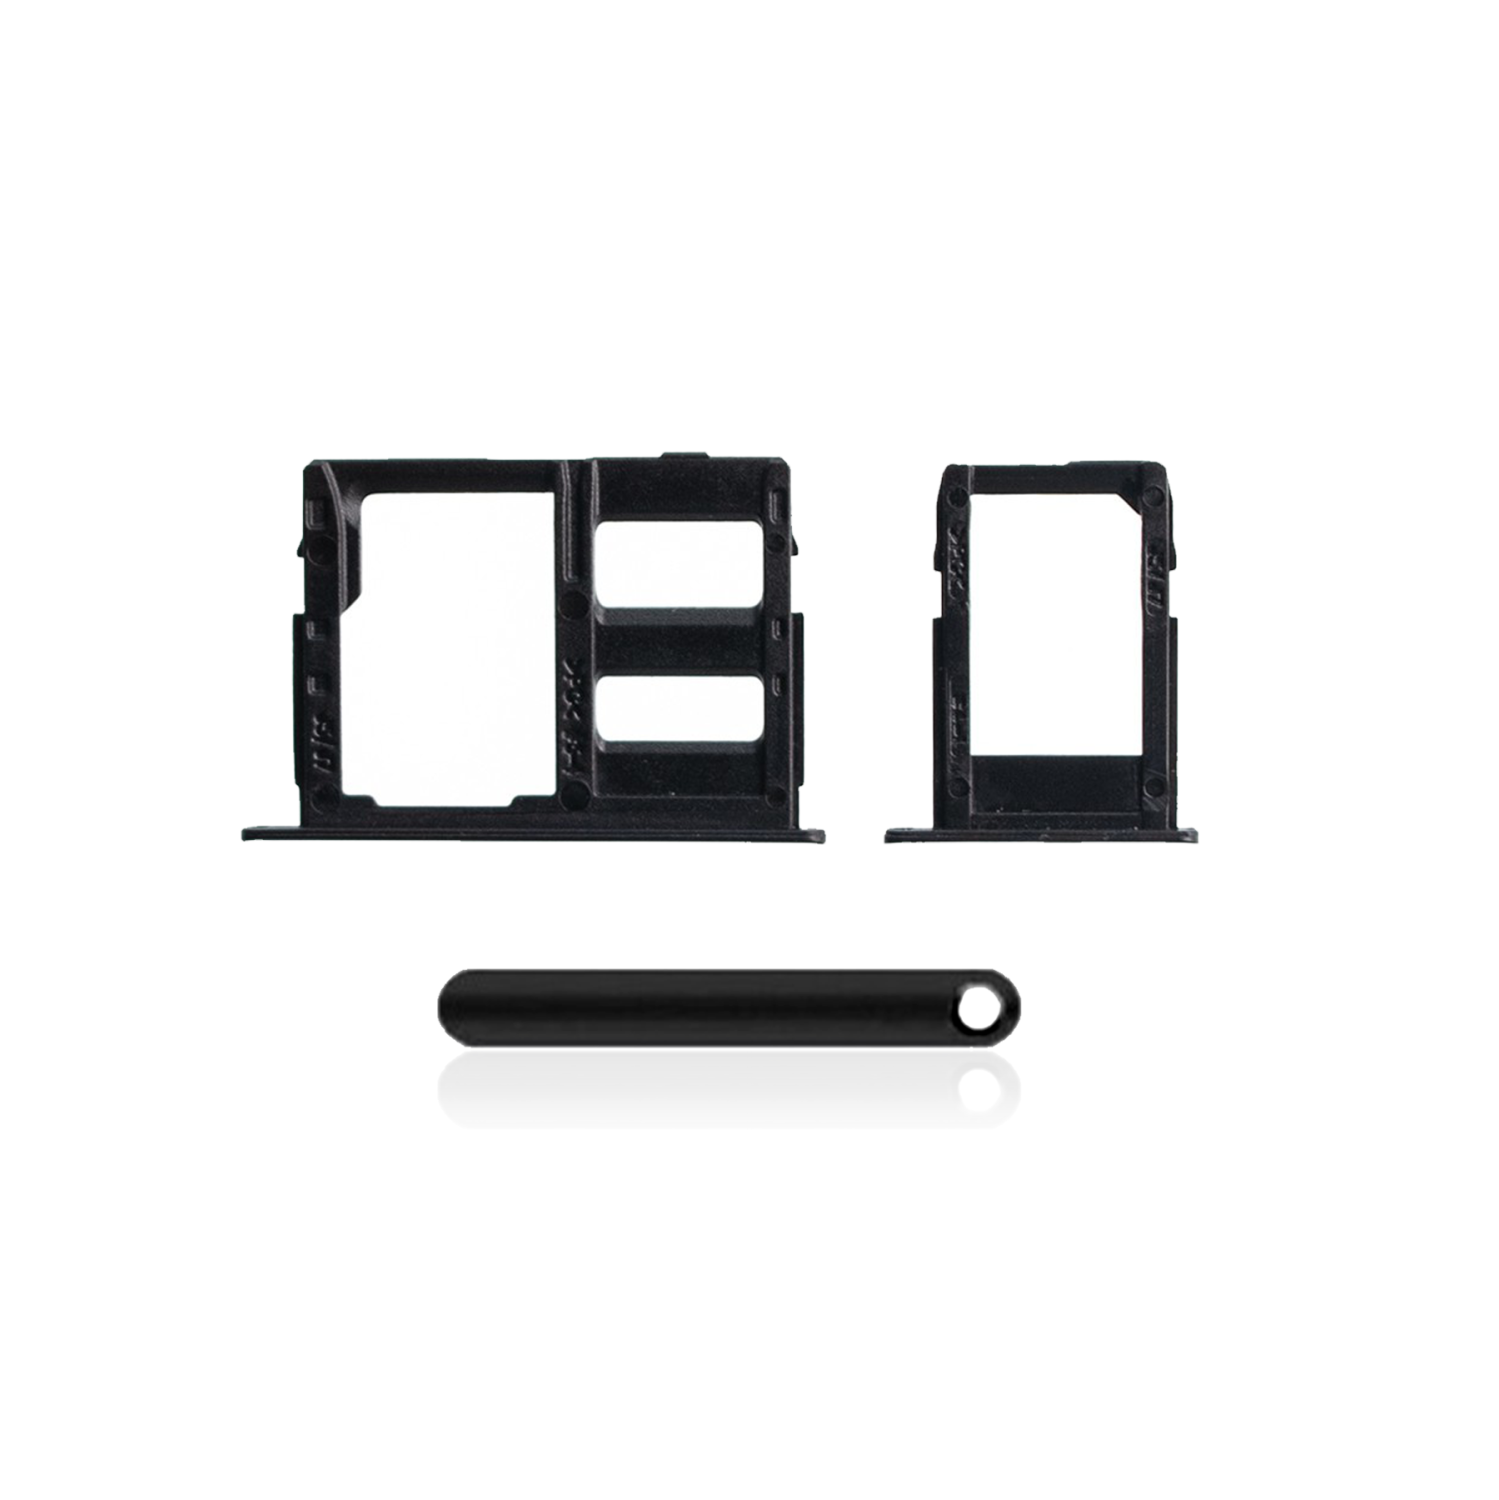 Replacement Sim Card Tray Compatible For Samsung Galaxy J7 Pro (J730 / 2017) (Black)